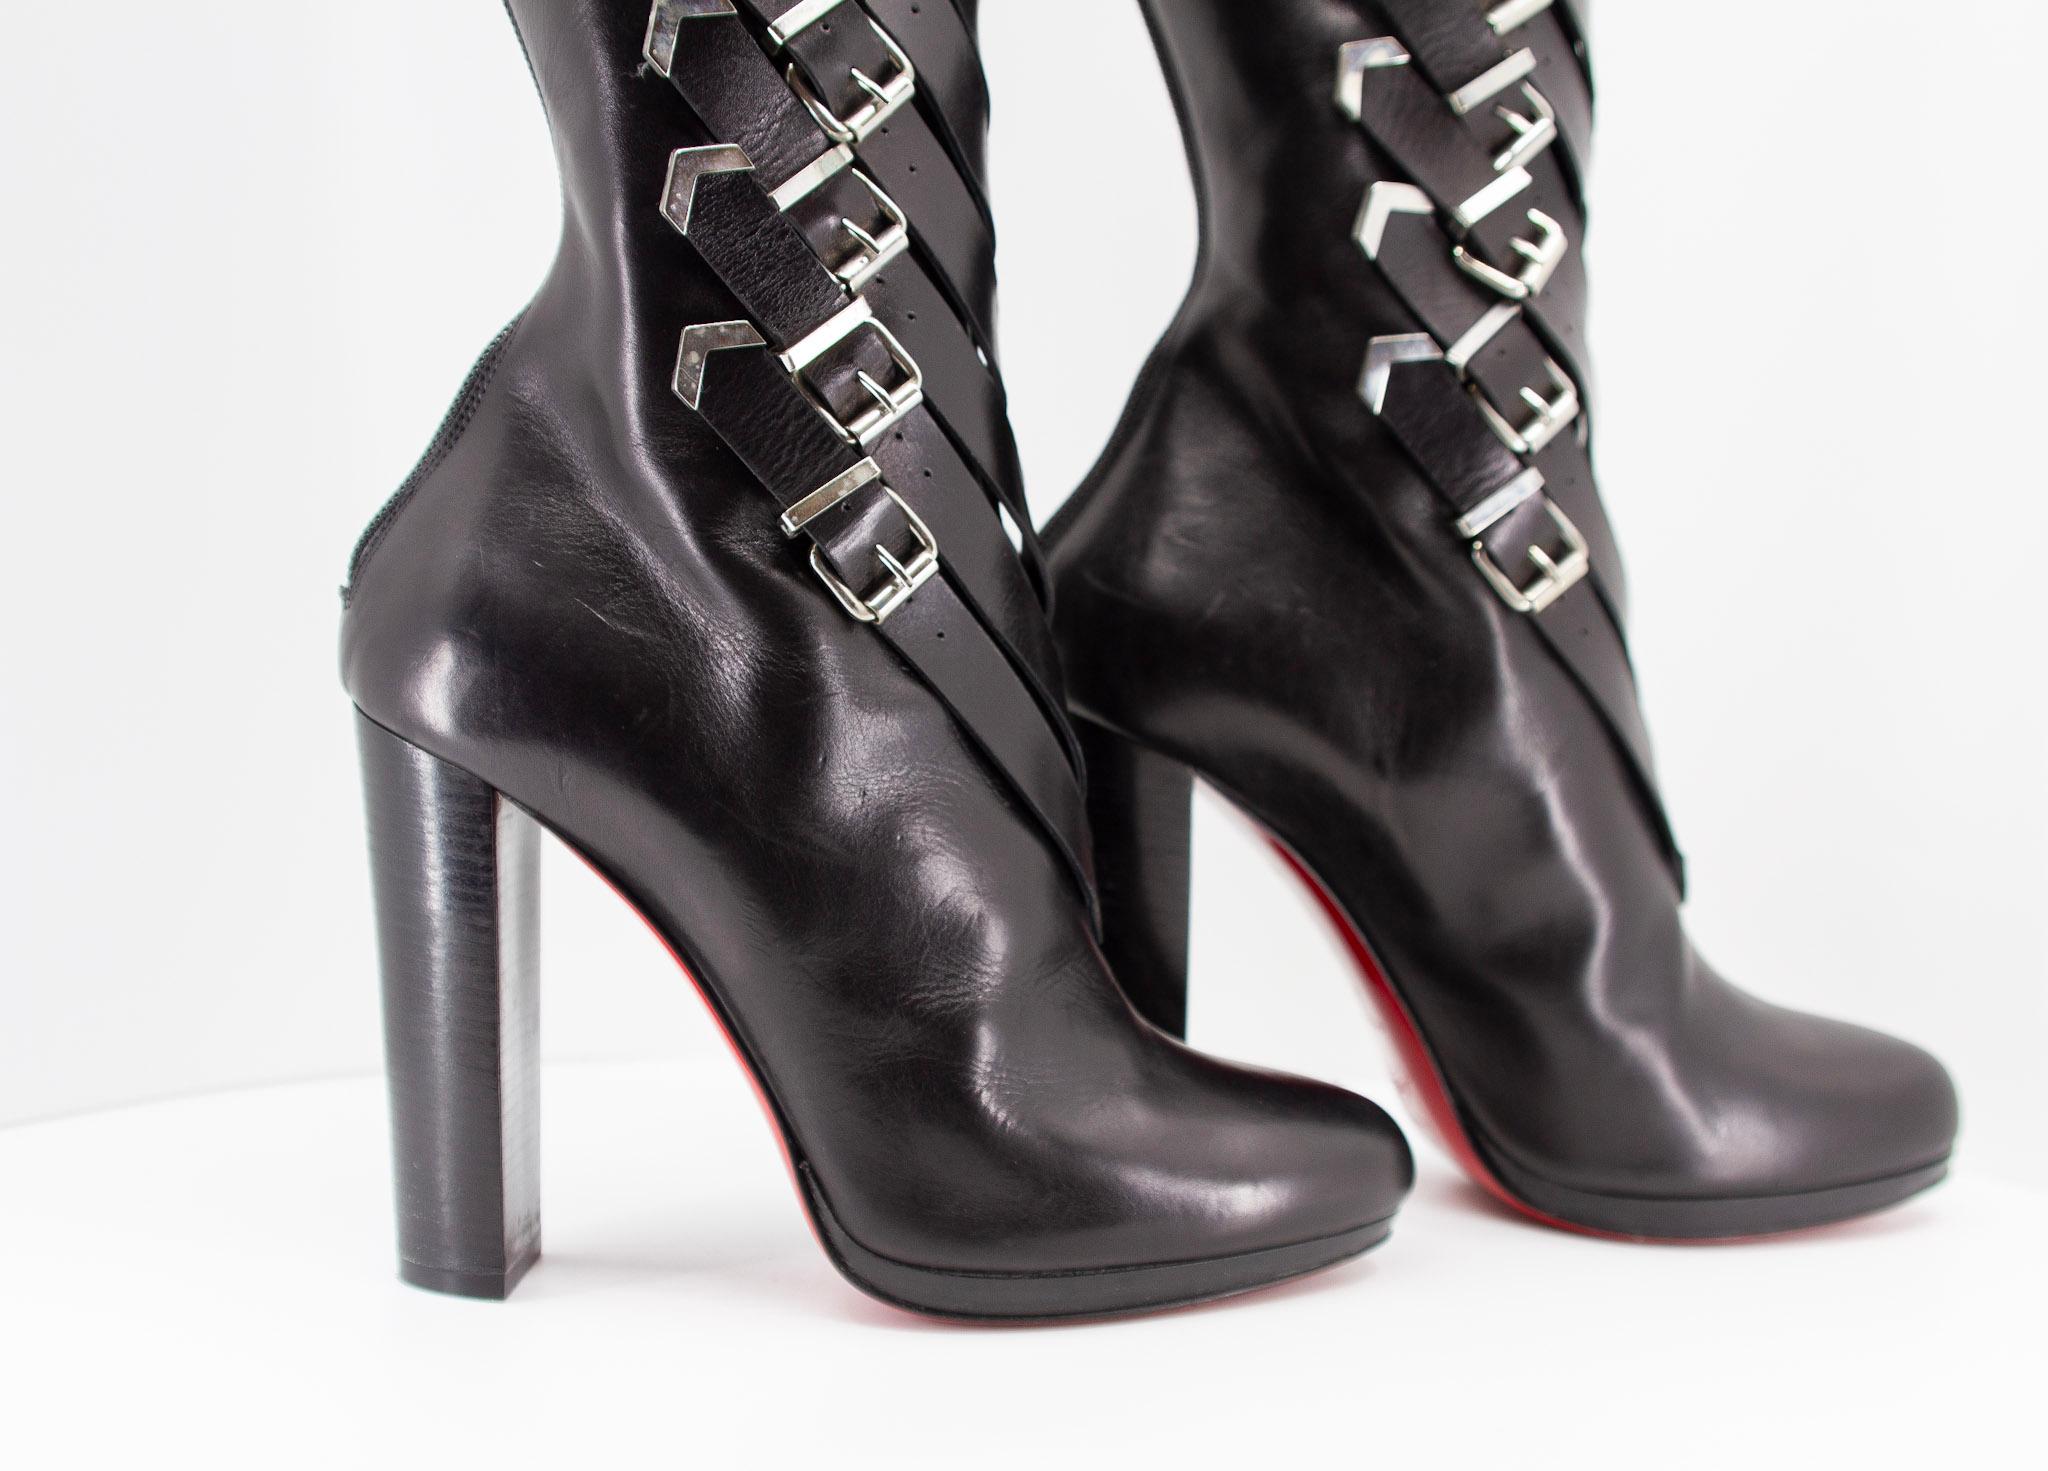 Rare Knee High Christian Louboutin Black Leather Boots For Sale 6